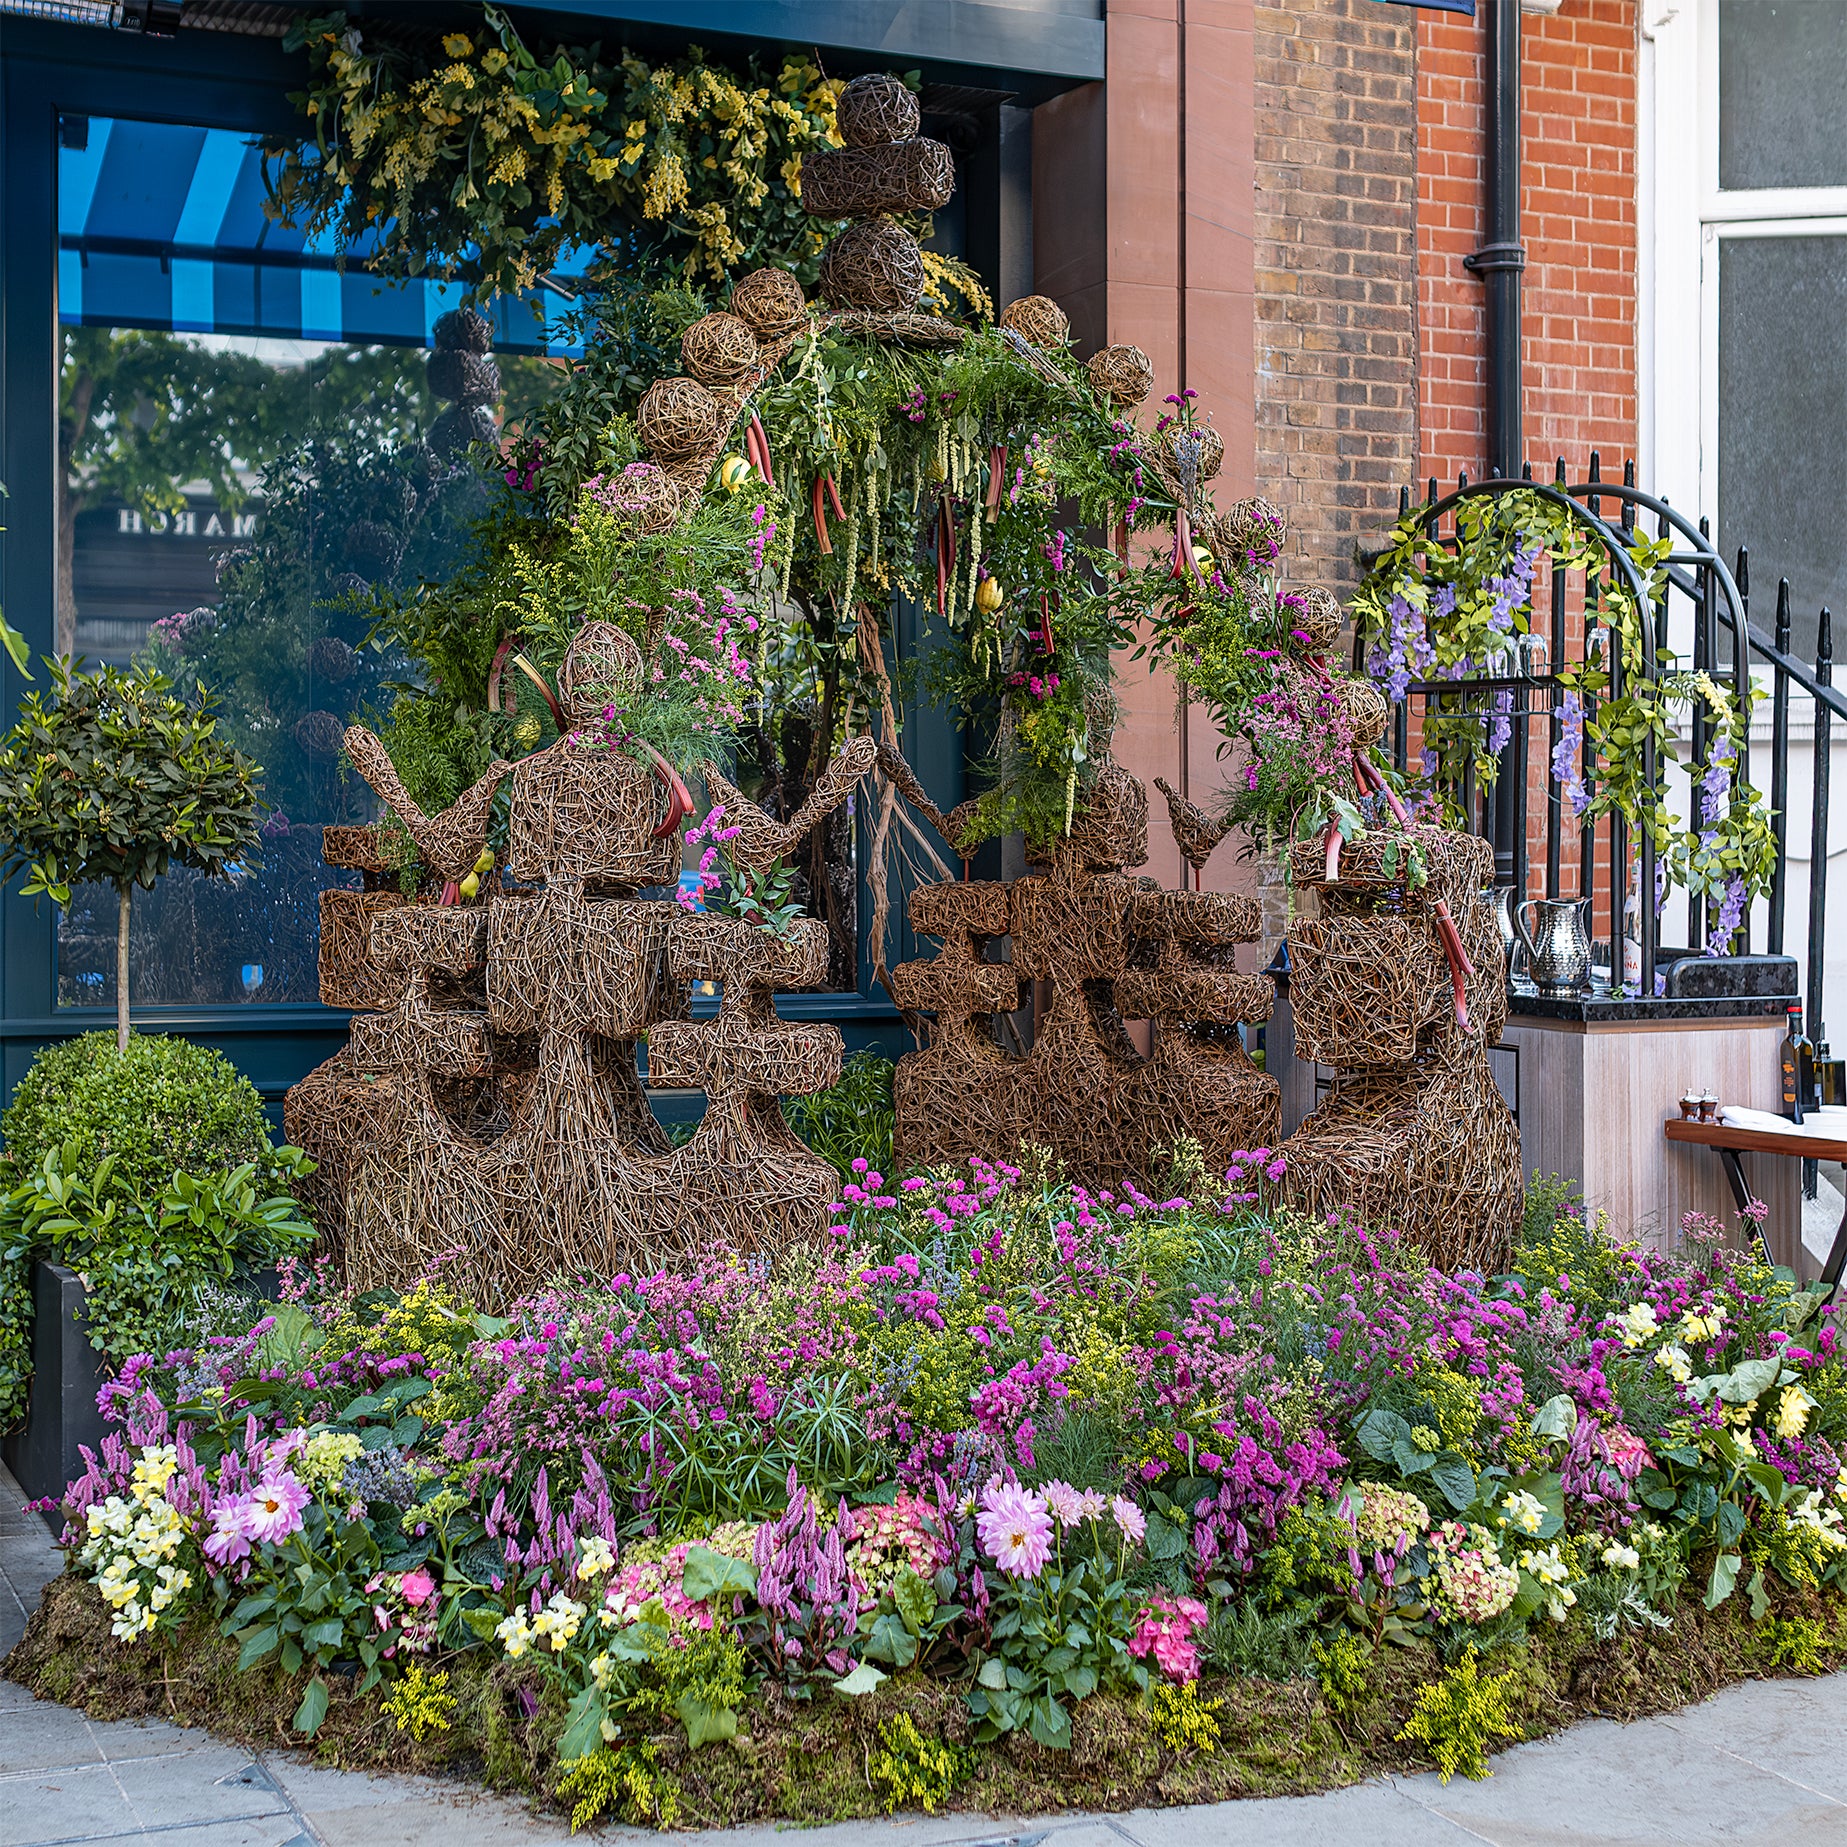 Wicker figures and a floral arch crafted by event florist Amaranté London for Chelsea in Bloom, featuring vibrant pink, yellow, and purple flowers in front of the Azzurra storefront.